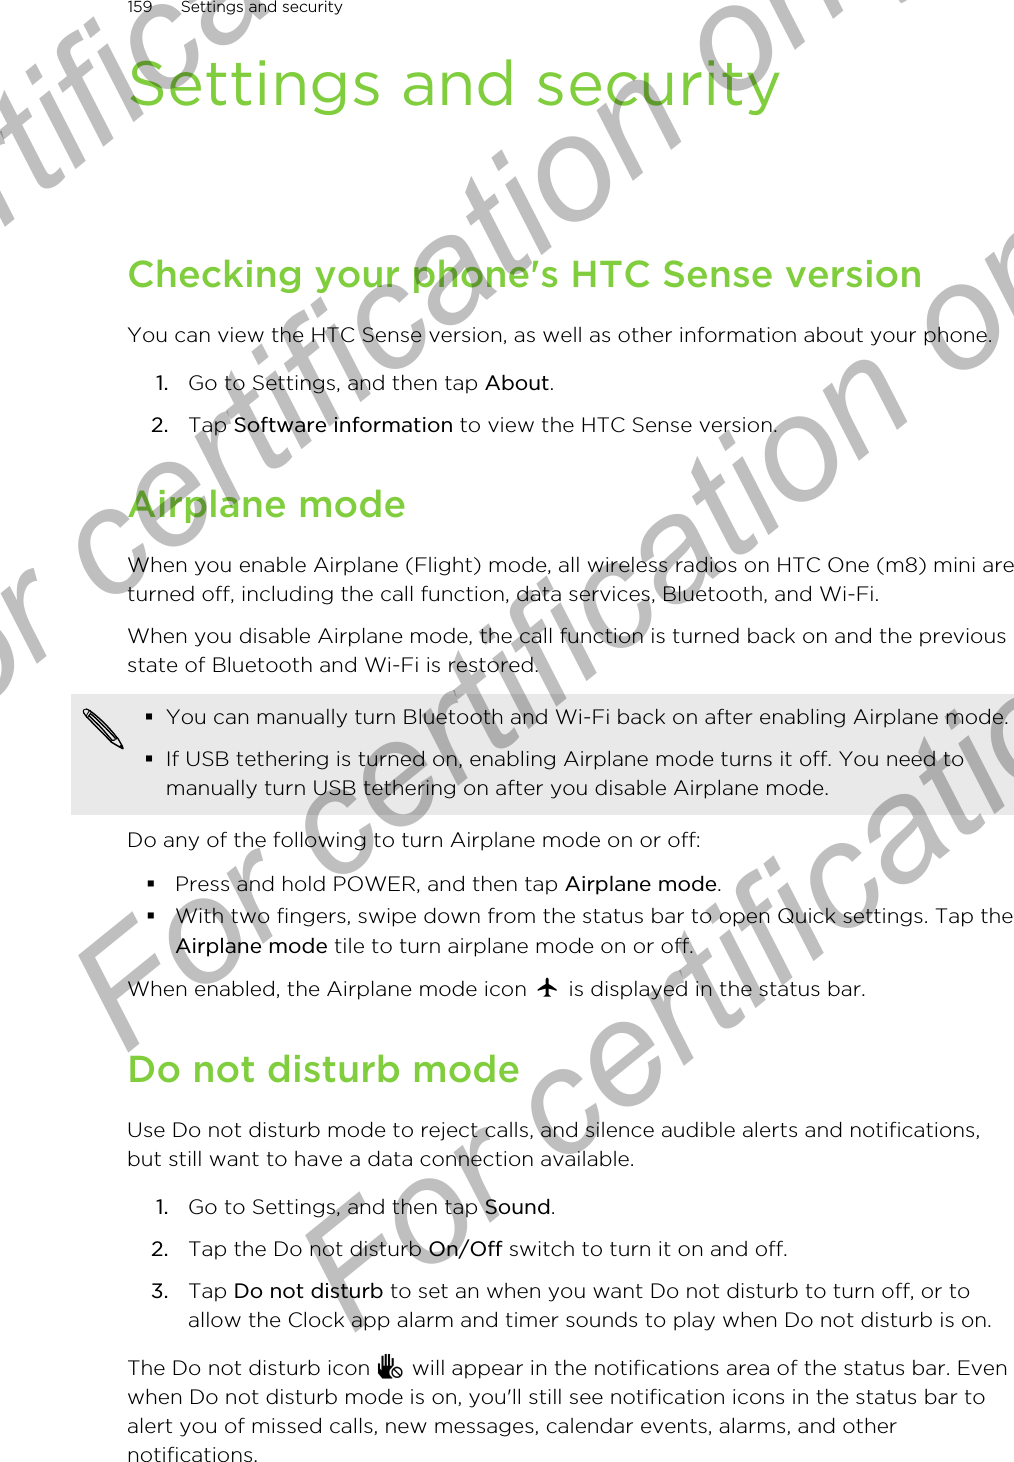 Settings and securityChecking your phone&apos;s HTC Sense versionYou can view the HTC Sense version, as well as other information about your phone.1. Go to Settings, and then tap About.2. Tap Software information to view the HTC Sense version.Airplane modeWhen you enable Airplane (Flight) mode, all wireless radios on HTC One (m8) mini areturned off, including the call function, data services, Bluetooth, and Wi-Fi.When you disable Airplane mode, the call function is turned back on and the previousstate of Bluetooth and Wi-Fi is restored.§You can manually turn Bluetooth and Wi-Fi back on after enabling Airplane mode.§If USB tethering is turned on, enabling Airplane mode turns it off. You need tomanually turn USB tethering on after you disable Airplane mode.Do any of the following to turn Airplane mode on or off:§Press and hold POWER, and then tap Airplane mode.§With two fingers, swipe down from the status bar to open Quick settings. Tap theAirplane mode tile to turn airplane mode on or off.When enabled, the Airplane mode icon   is displayed in the status bar.Do not disturb modeUse Do not disturb mode to reject calls, and silence audible alerts and notifications,but still want to have a data connection available.1. Go to Settings, and then tap Sound.2. Tap the Do not disturb On/Off switch to turn it on and off.3. Tap Do not disturb to set an when you want Do not disturb to turn off, or toallow the Clock app alarm and timer sounds to play when Do not disturb is on.The Do not disturb icon   will appear in the notifications area of the status bar. Evenwhen Do not disturb mode is on, you&apos;ll still see notification icons in the status bar toalert you of missed calls, new messages, calendar events, alarms, and othernotifications.159 Settings and securityFor certification  For certification only  For certification only  For certification only 